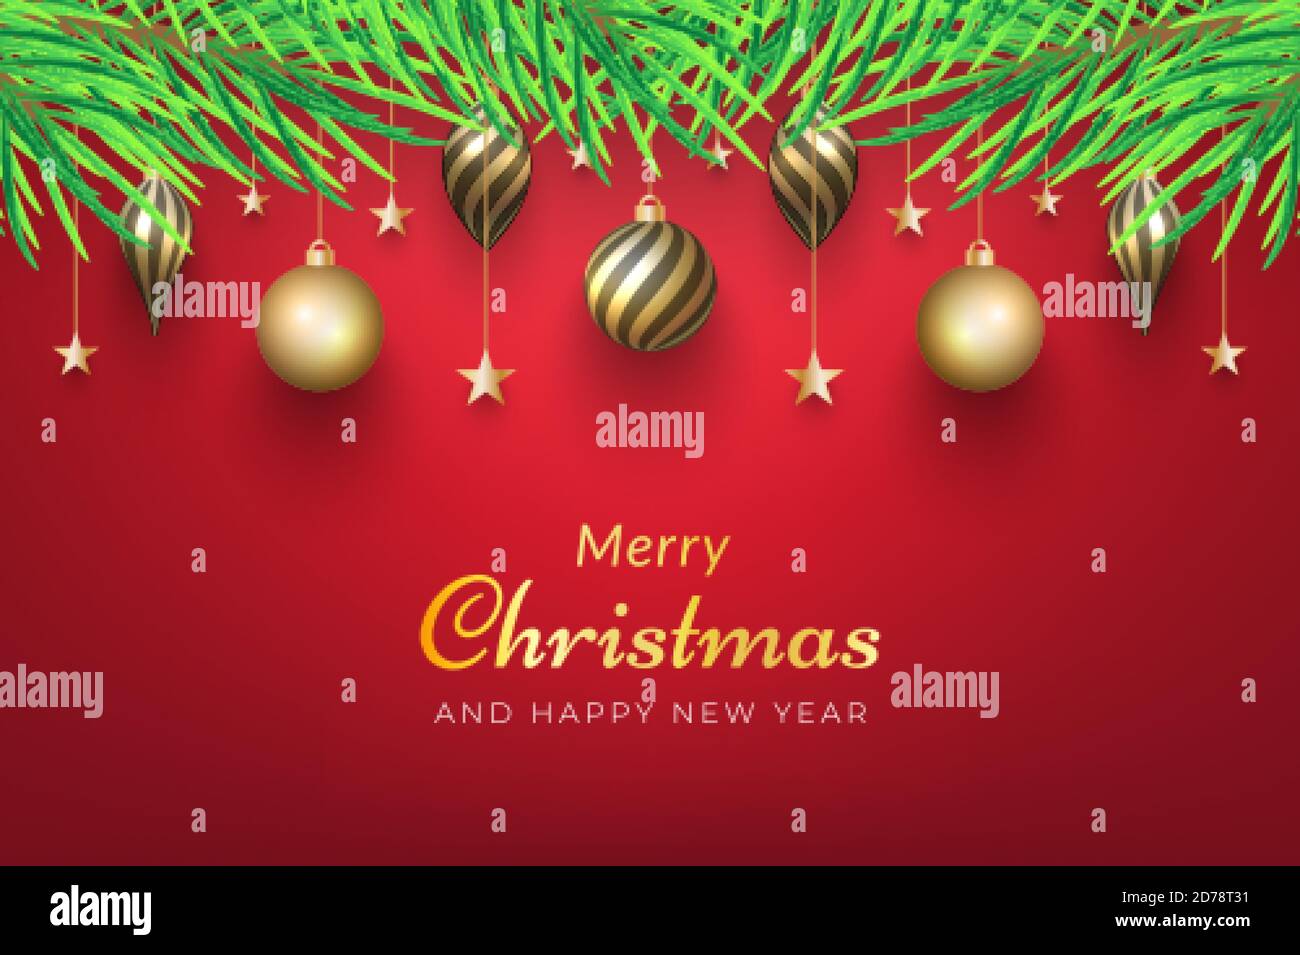 Christmas background with golden ornaments hanging on the tree. vectors for advertisements, banners, greeting cards, social media posts and more Stock Vector